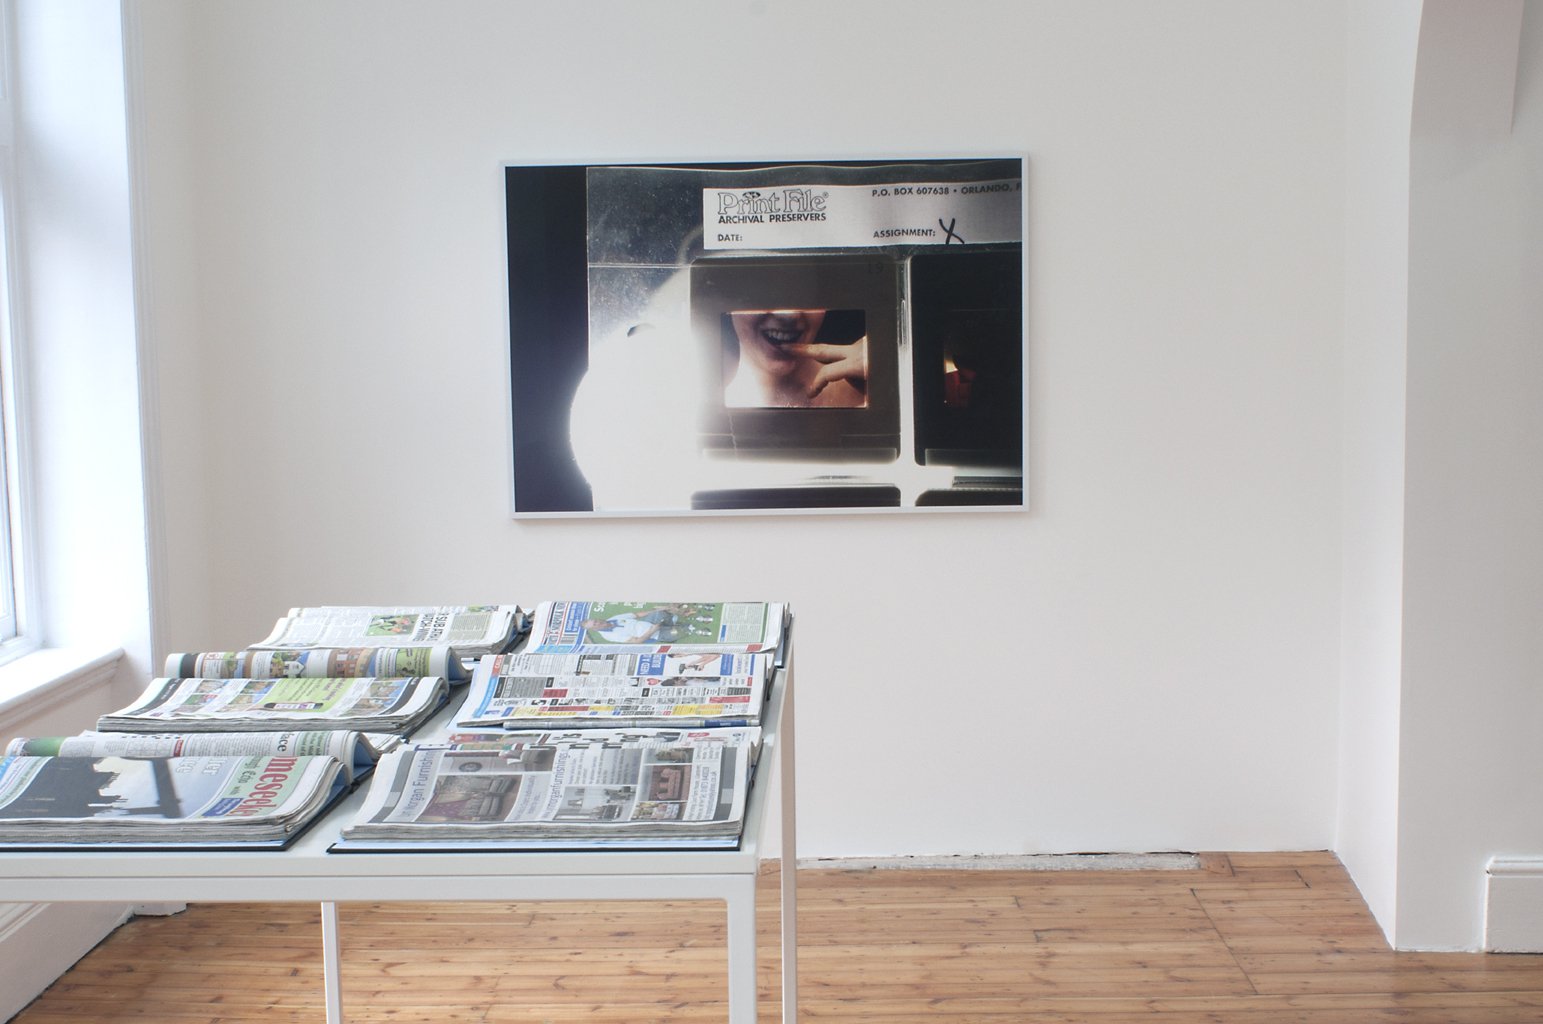 Installation view, Gentle Madness, Rodeo, London, 2014